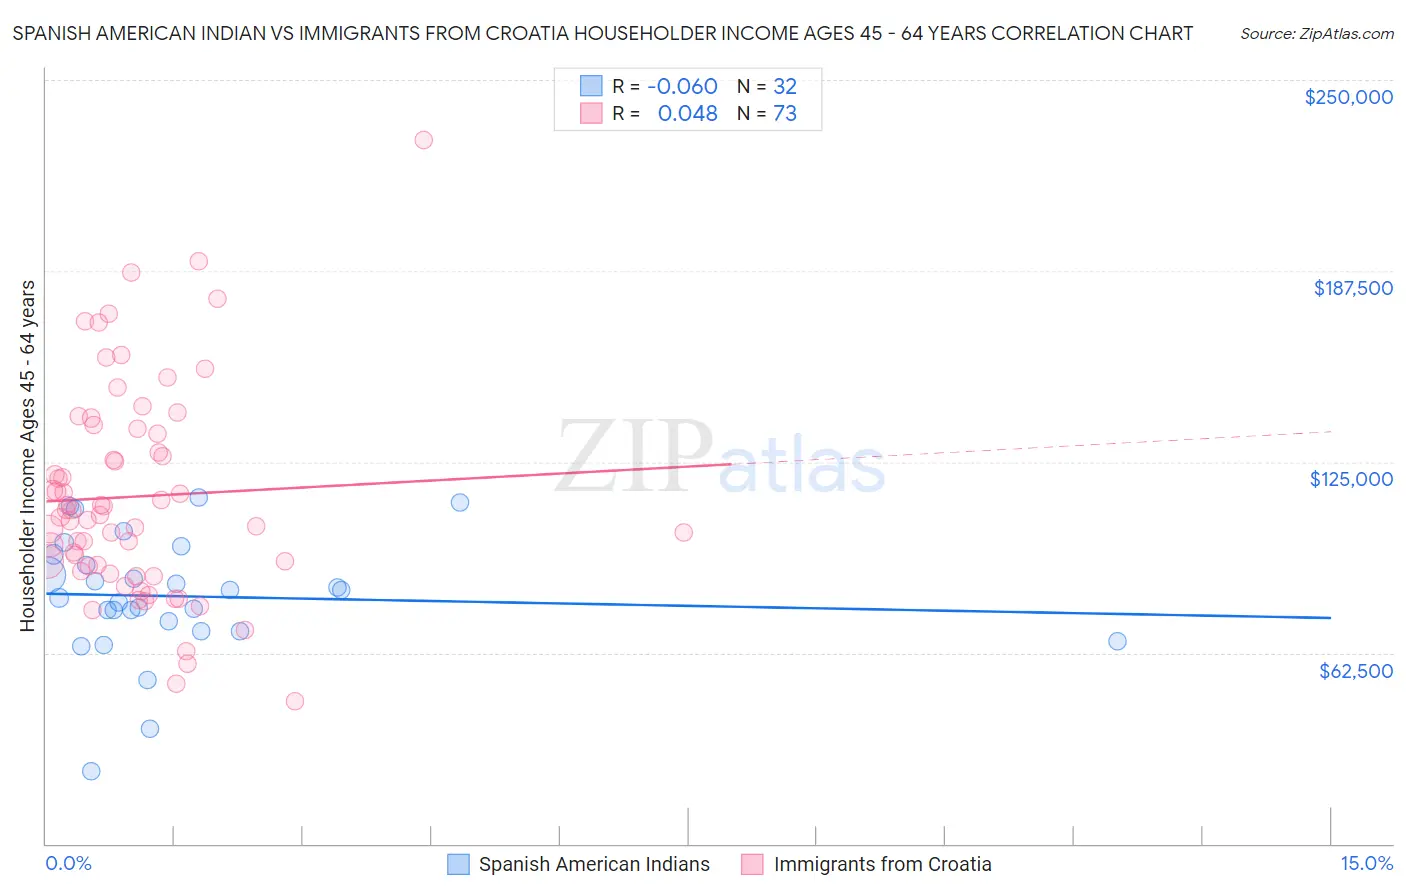 Spanish American Indian vs Immigrants from Croatia Householder Income Ages 45 - 64 years